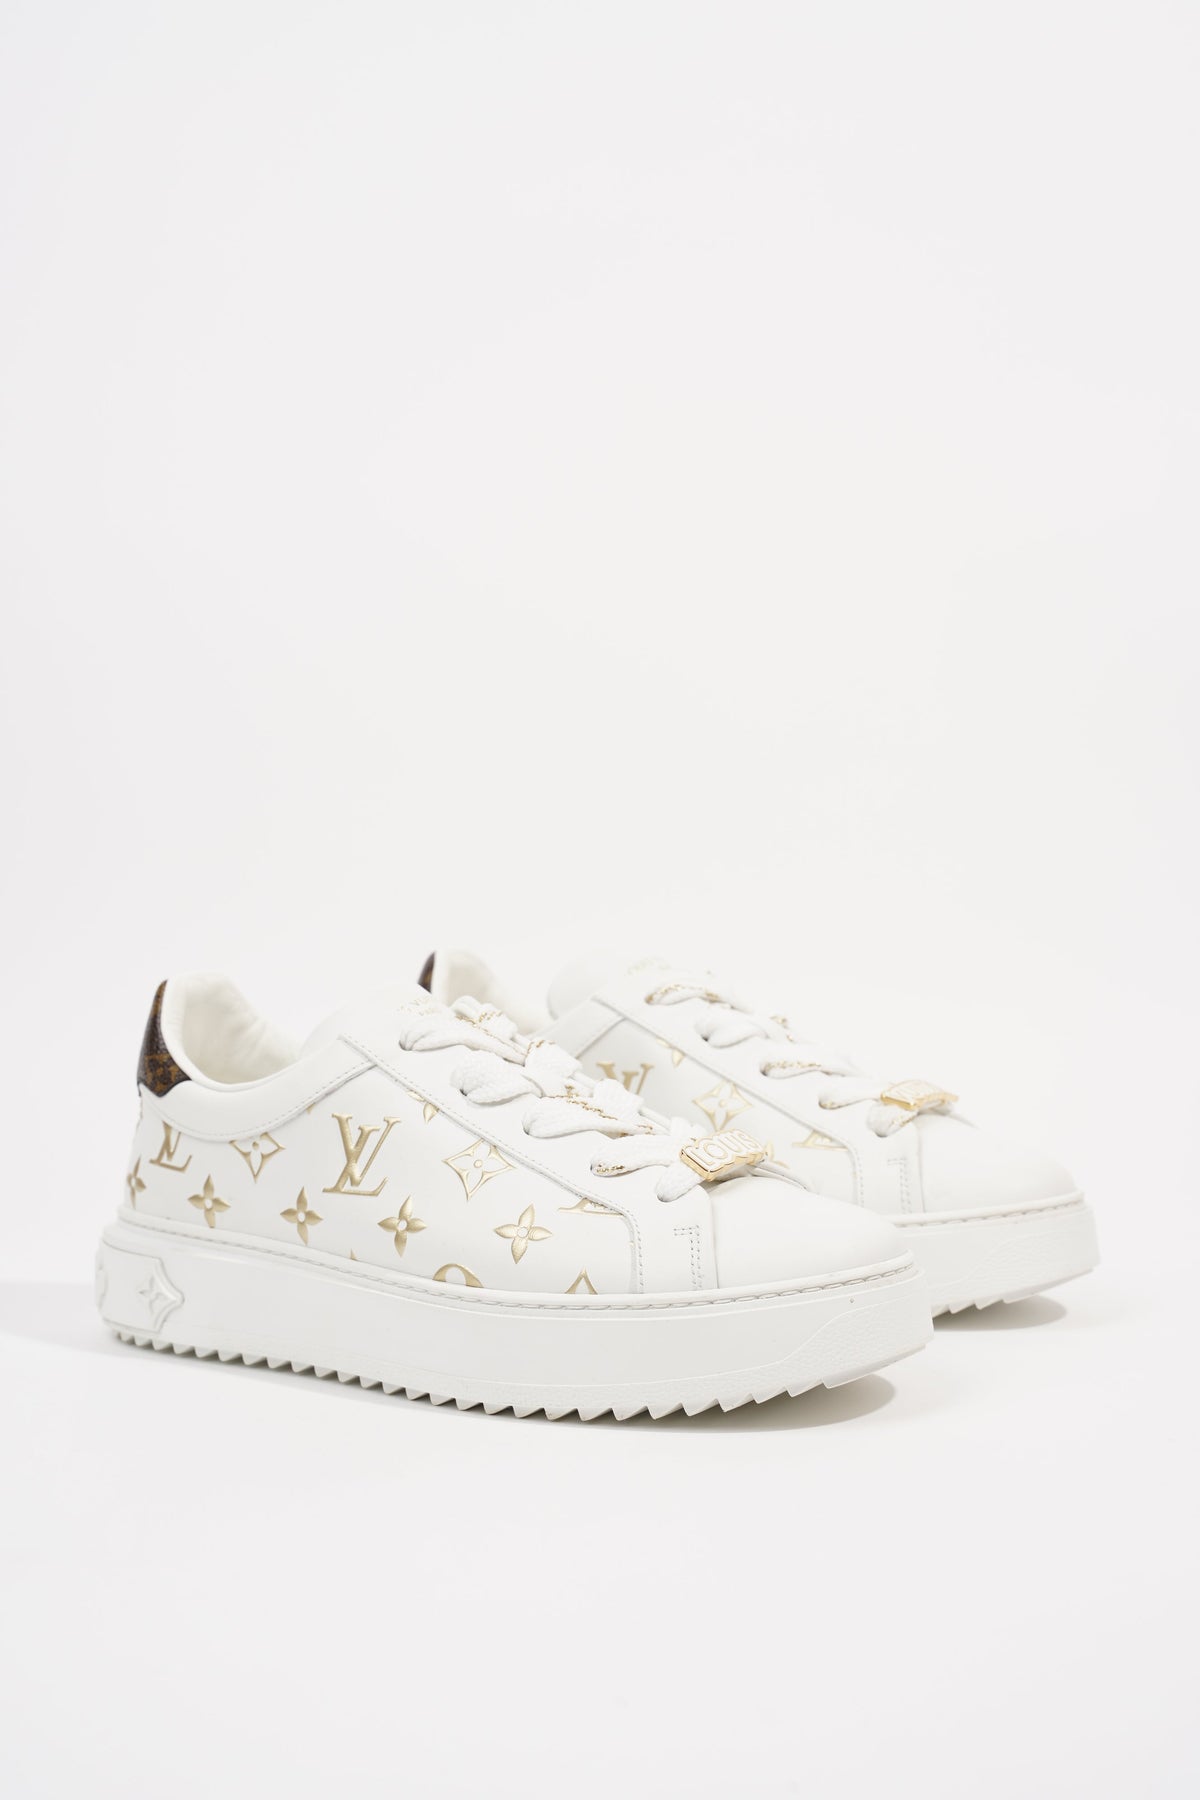 Time out leather trainers Louis Vuitton White size 35.5 EU in